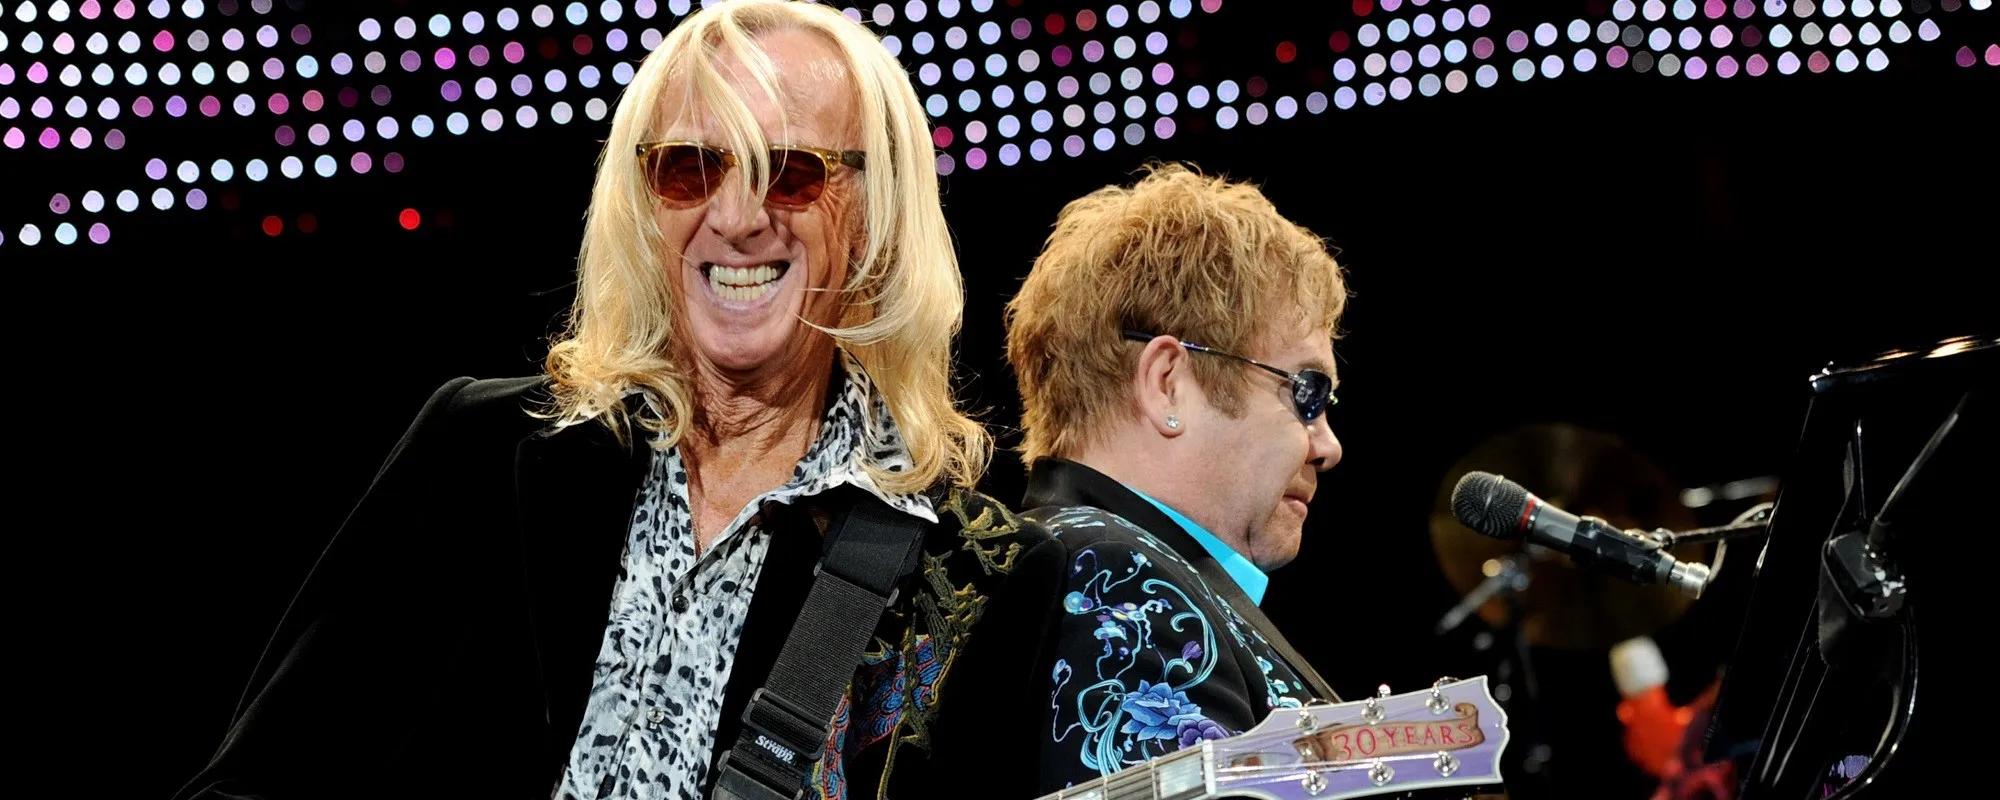 5 Songs Featuring Elton John Guitarist Davey Johnstone by Artists Other than Elton [Video]